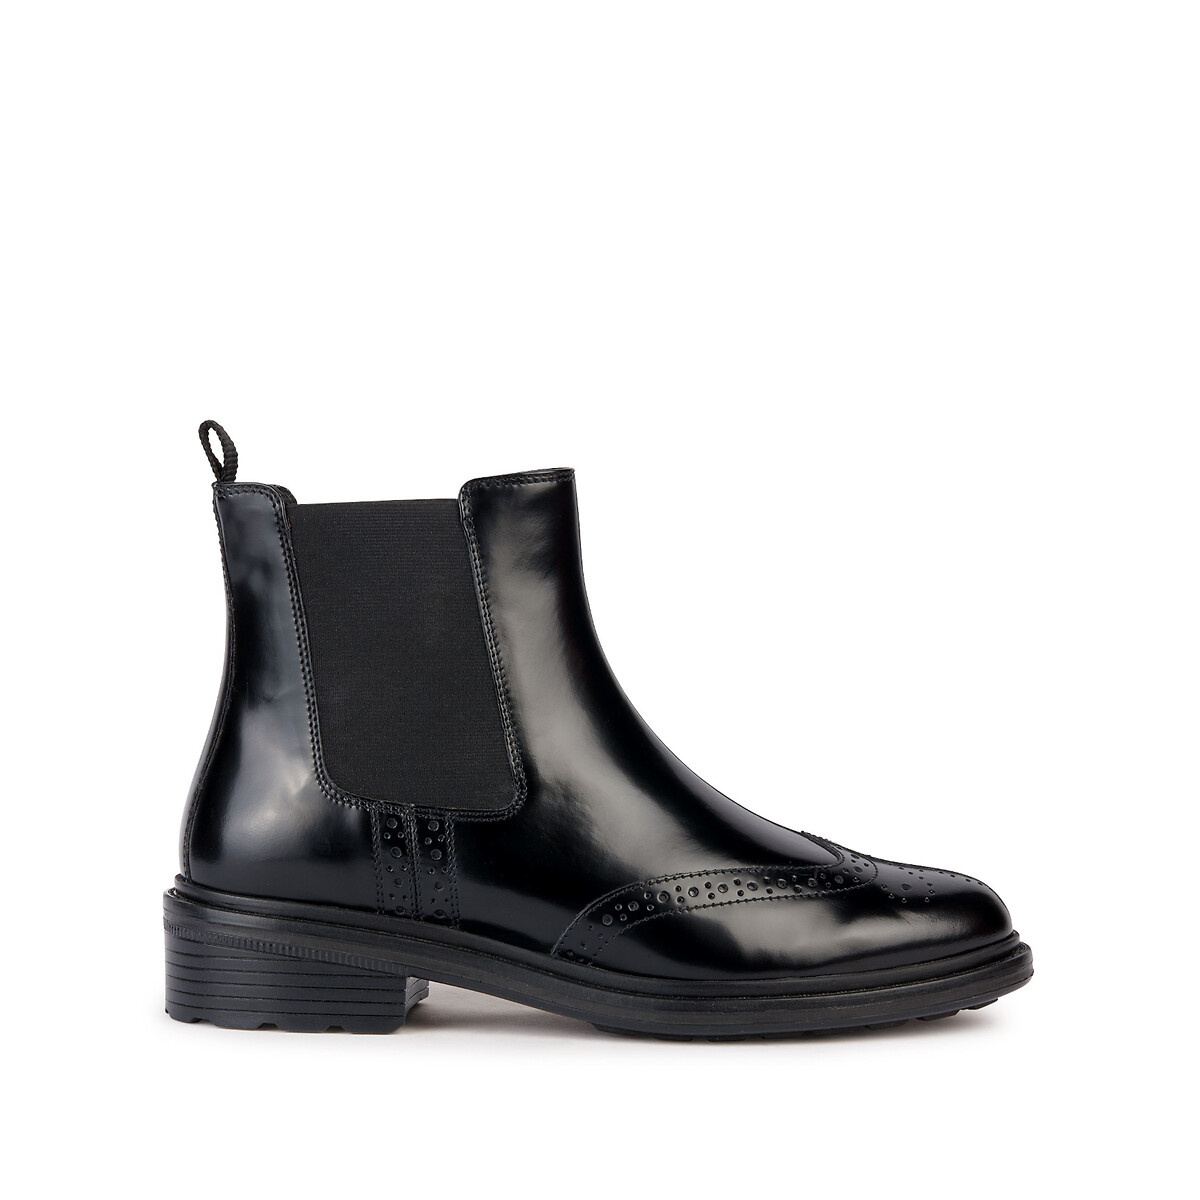 Walk Pleasure Chelsea Boots in Breathable Leather